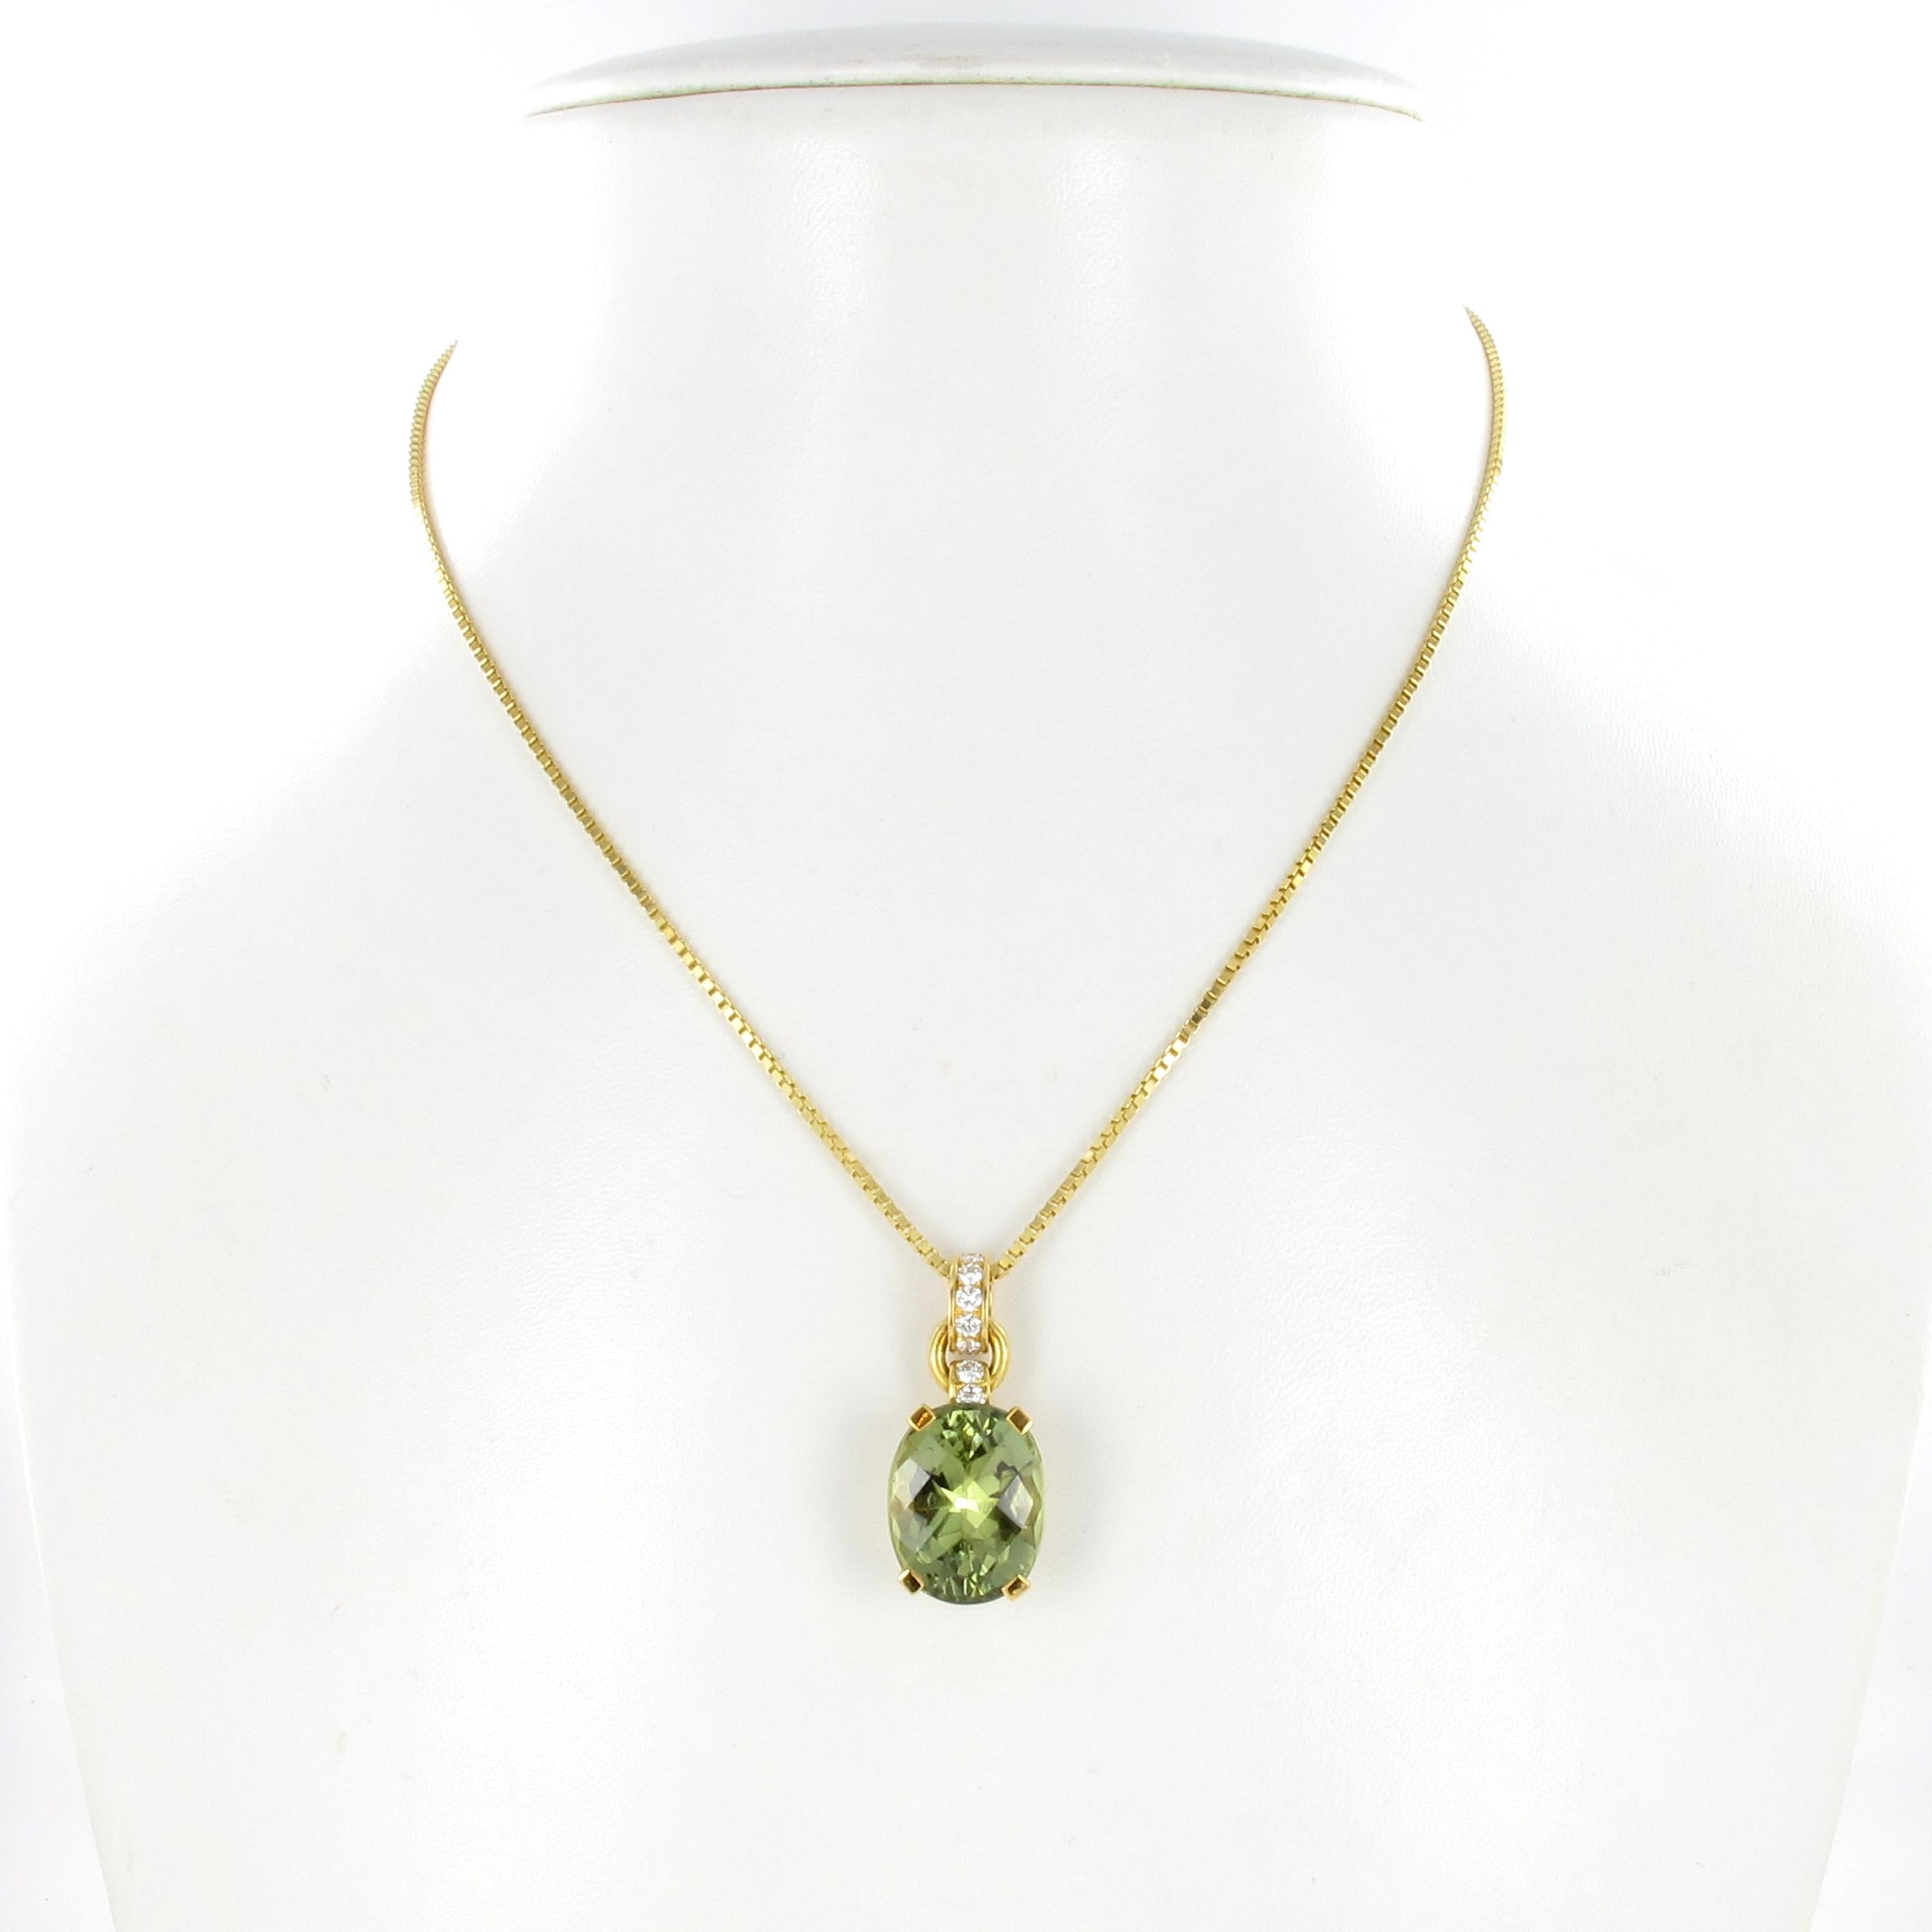 The pendant of this beautiful necklace is set with an intensely coloured, slightly yellowish green tourmaline of approx. 7.57 carats. Its oval checkerboard cut emphasises the vibrancy and fire of the tourmaline.
The mounting and the connecting